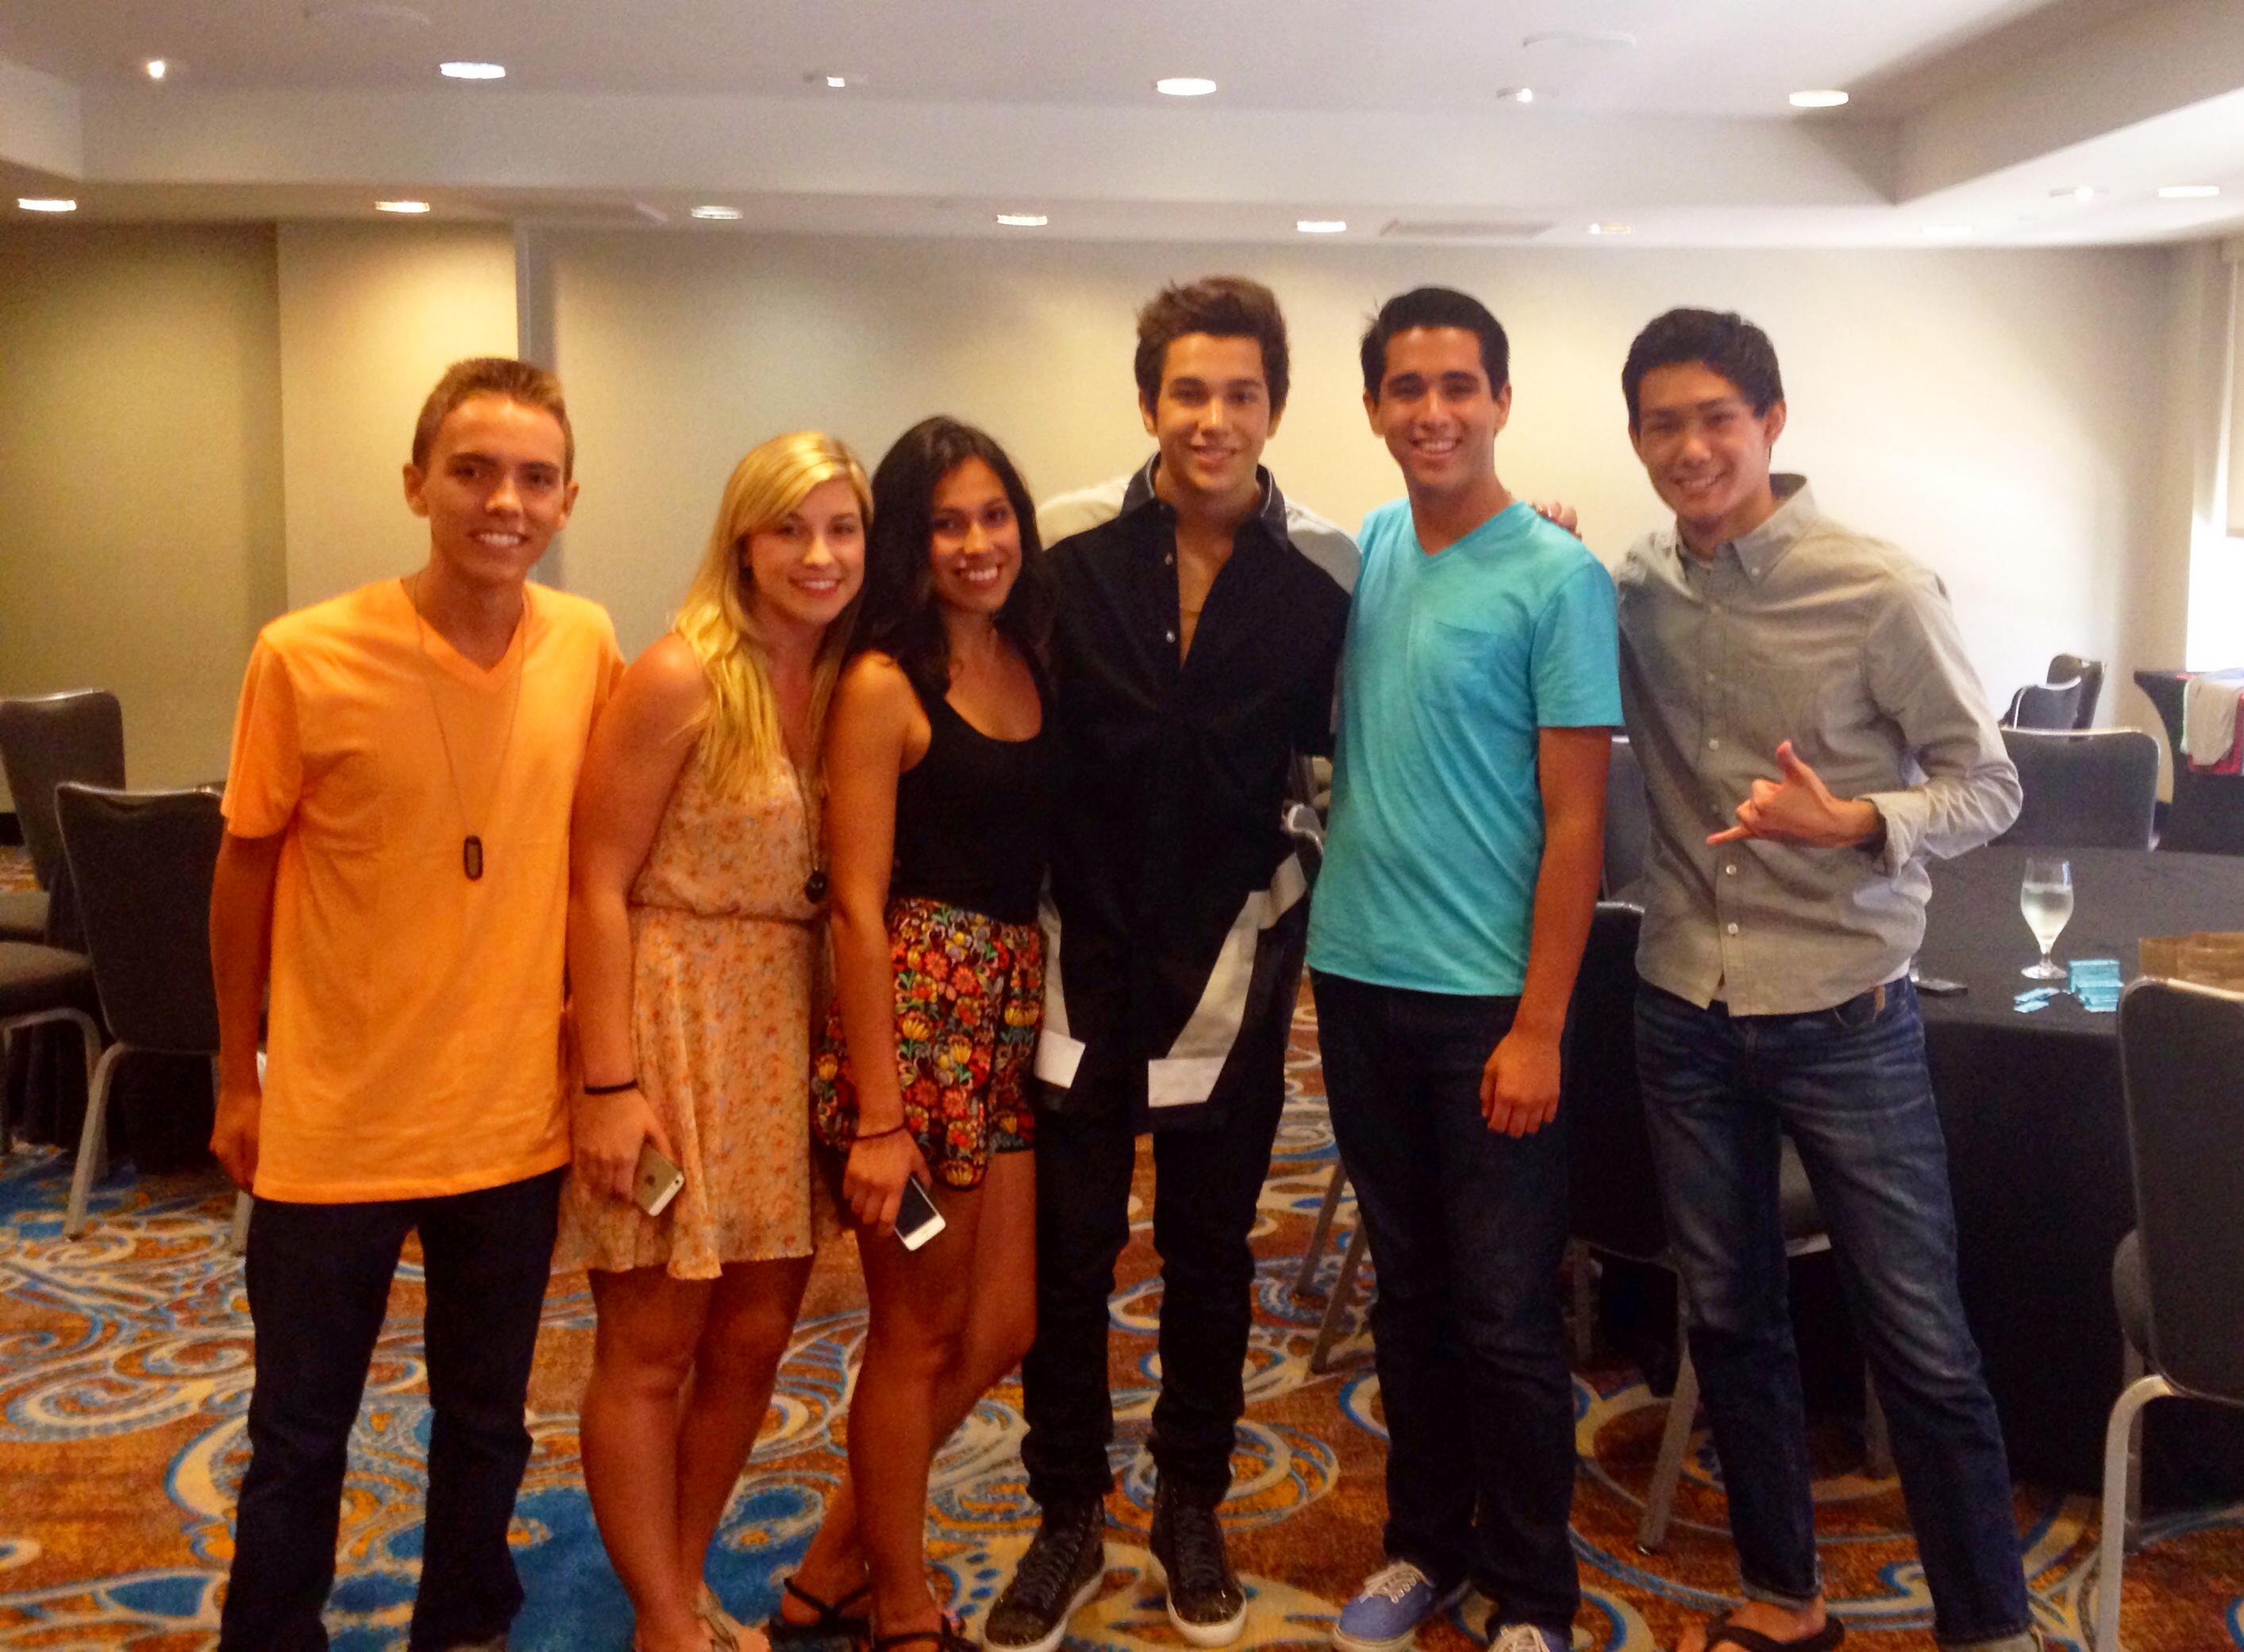 Kyle on set with Austin Mahone and the rest of the cast of his 5 Gum commercial.